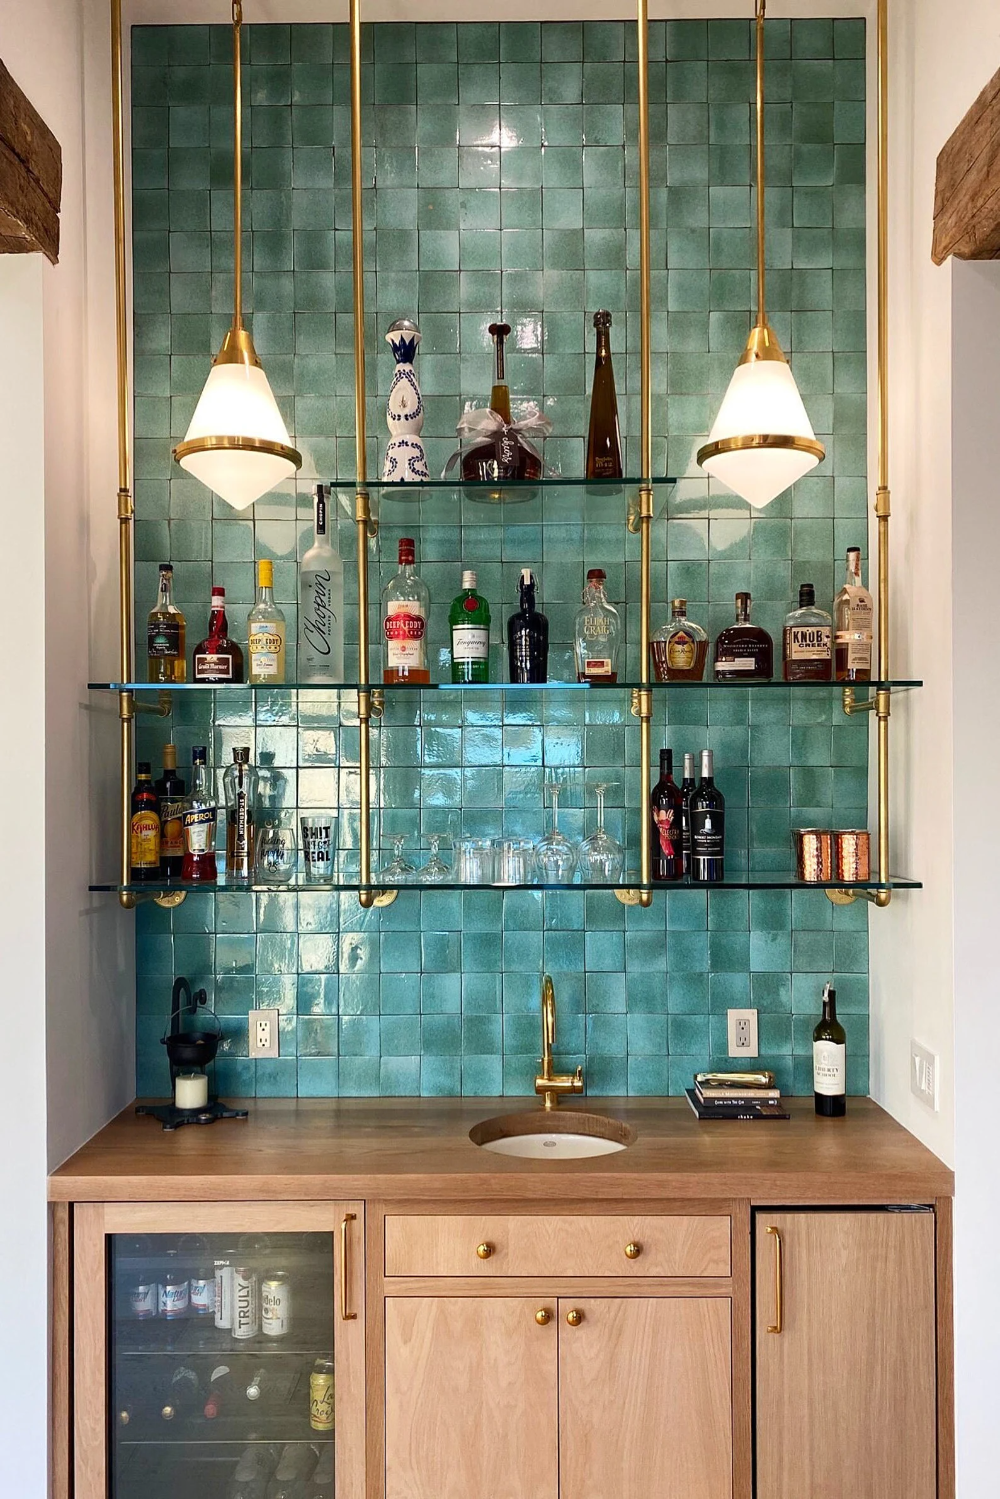 What Furniture Should You Choose For Your Home Bar?